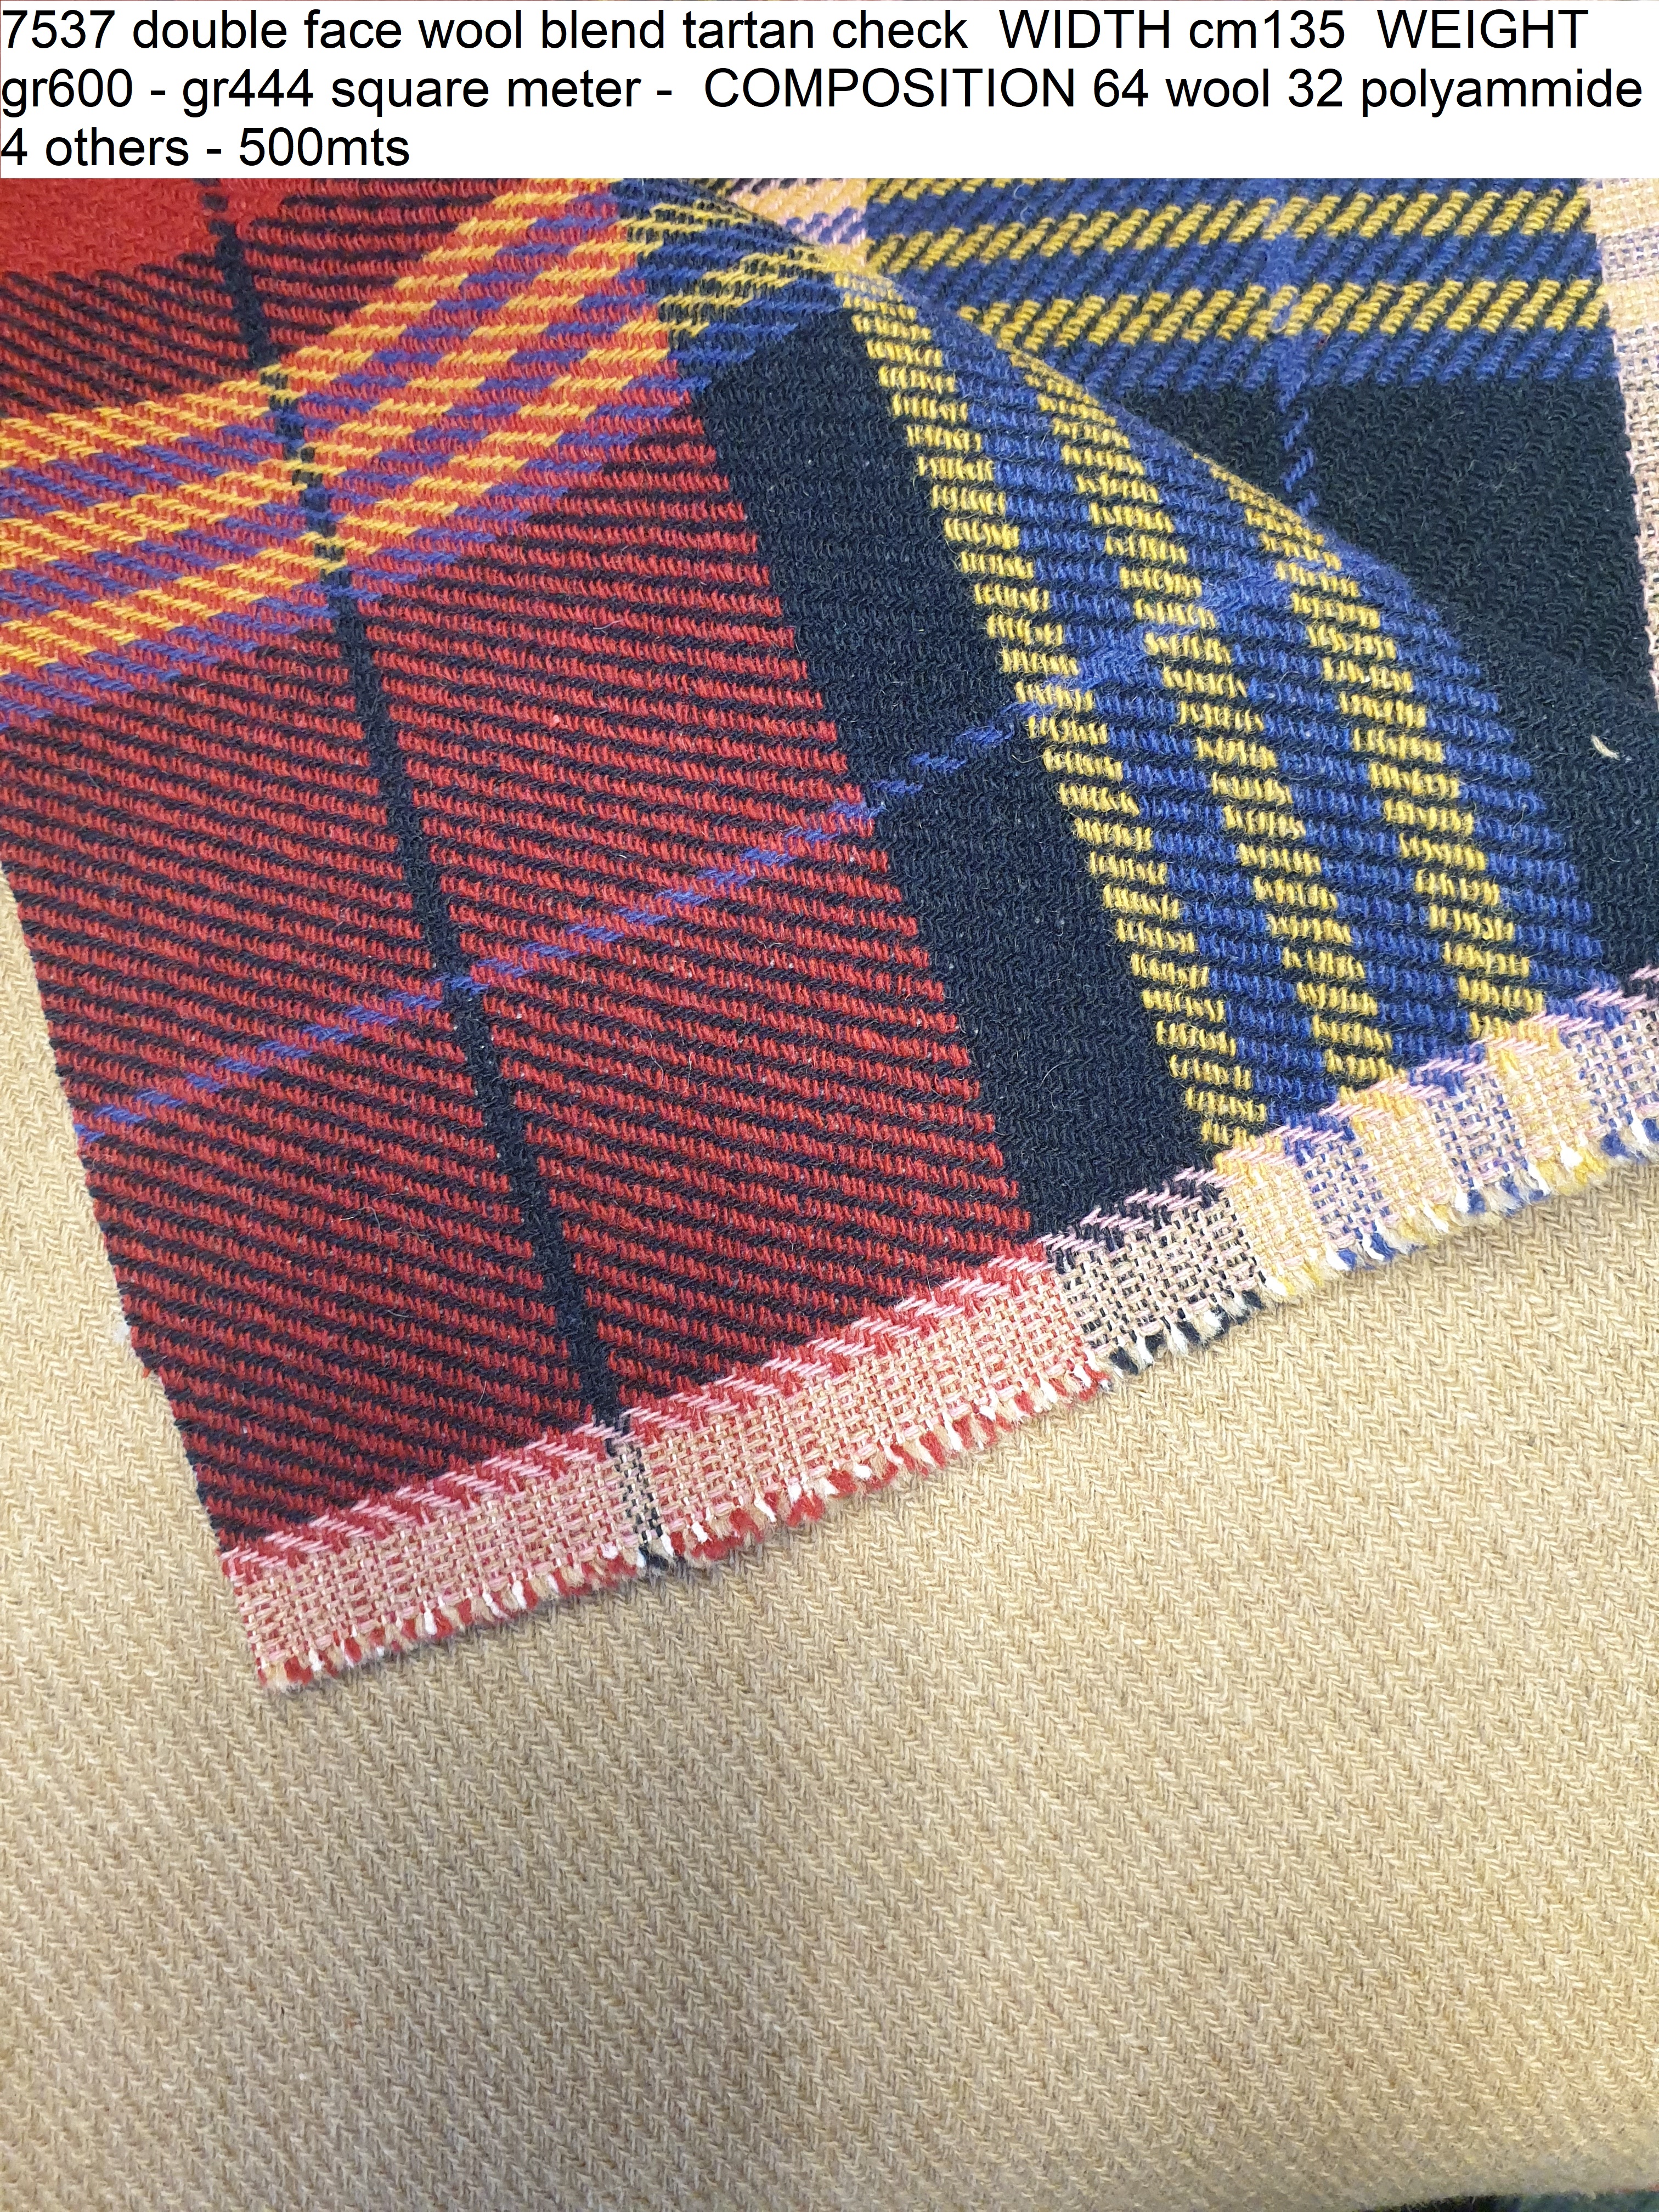 7537 double face wool blend tartan check WIDTH cm135 WEIGHT gr600 - gr444 square meter - COMPOSITION 64 wool 32 polyammide 4 others - 500mts